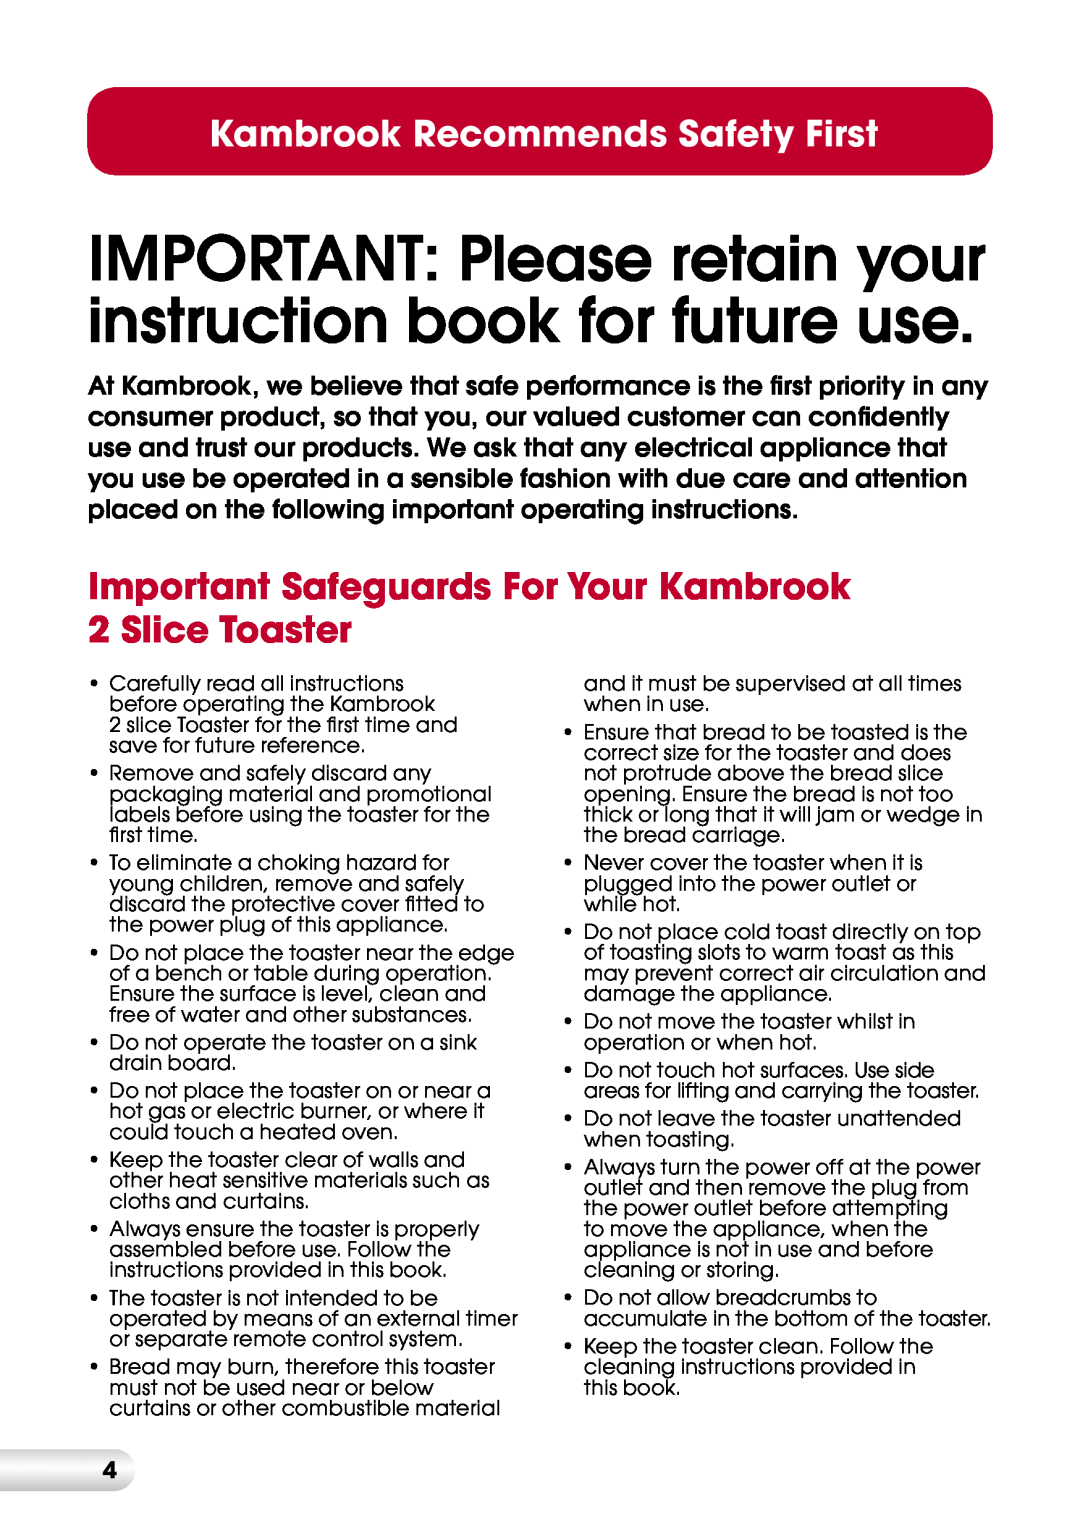 Kambrook KT220 manual Kambrook Recommends Safety First 